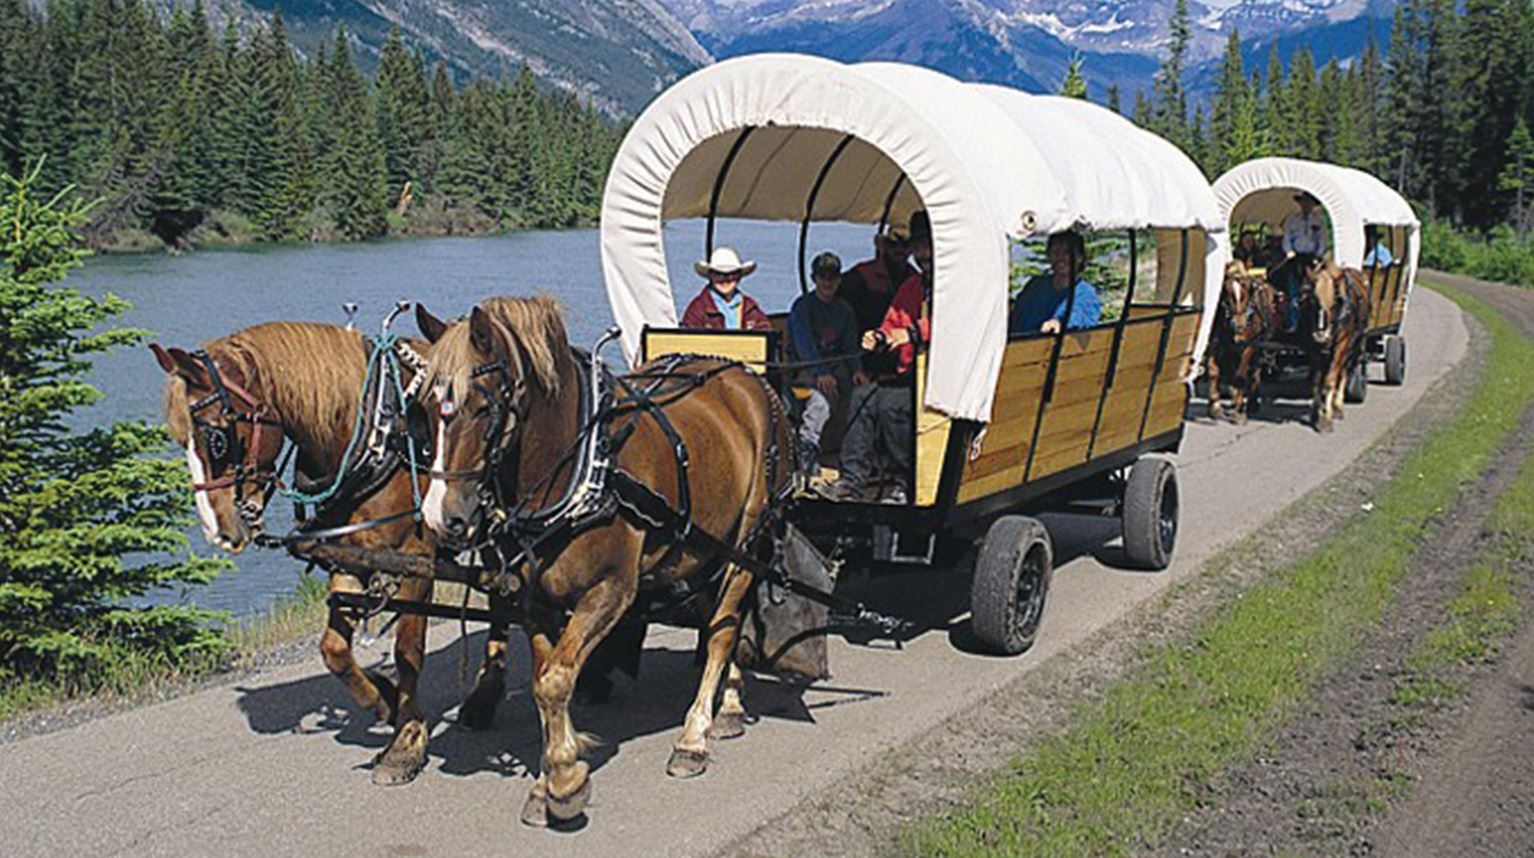 A wagon ride along the Bow River, with mountains and forests around Alberta.